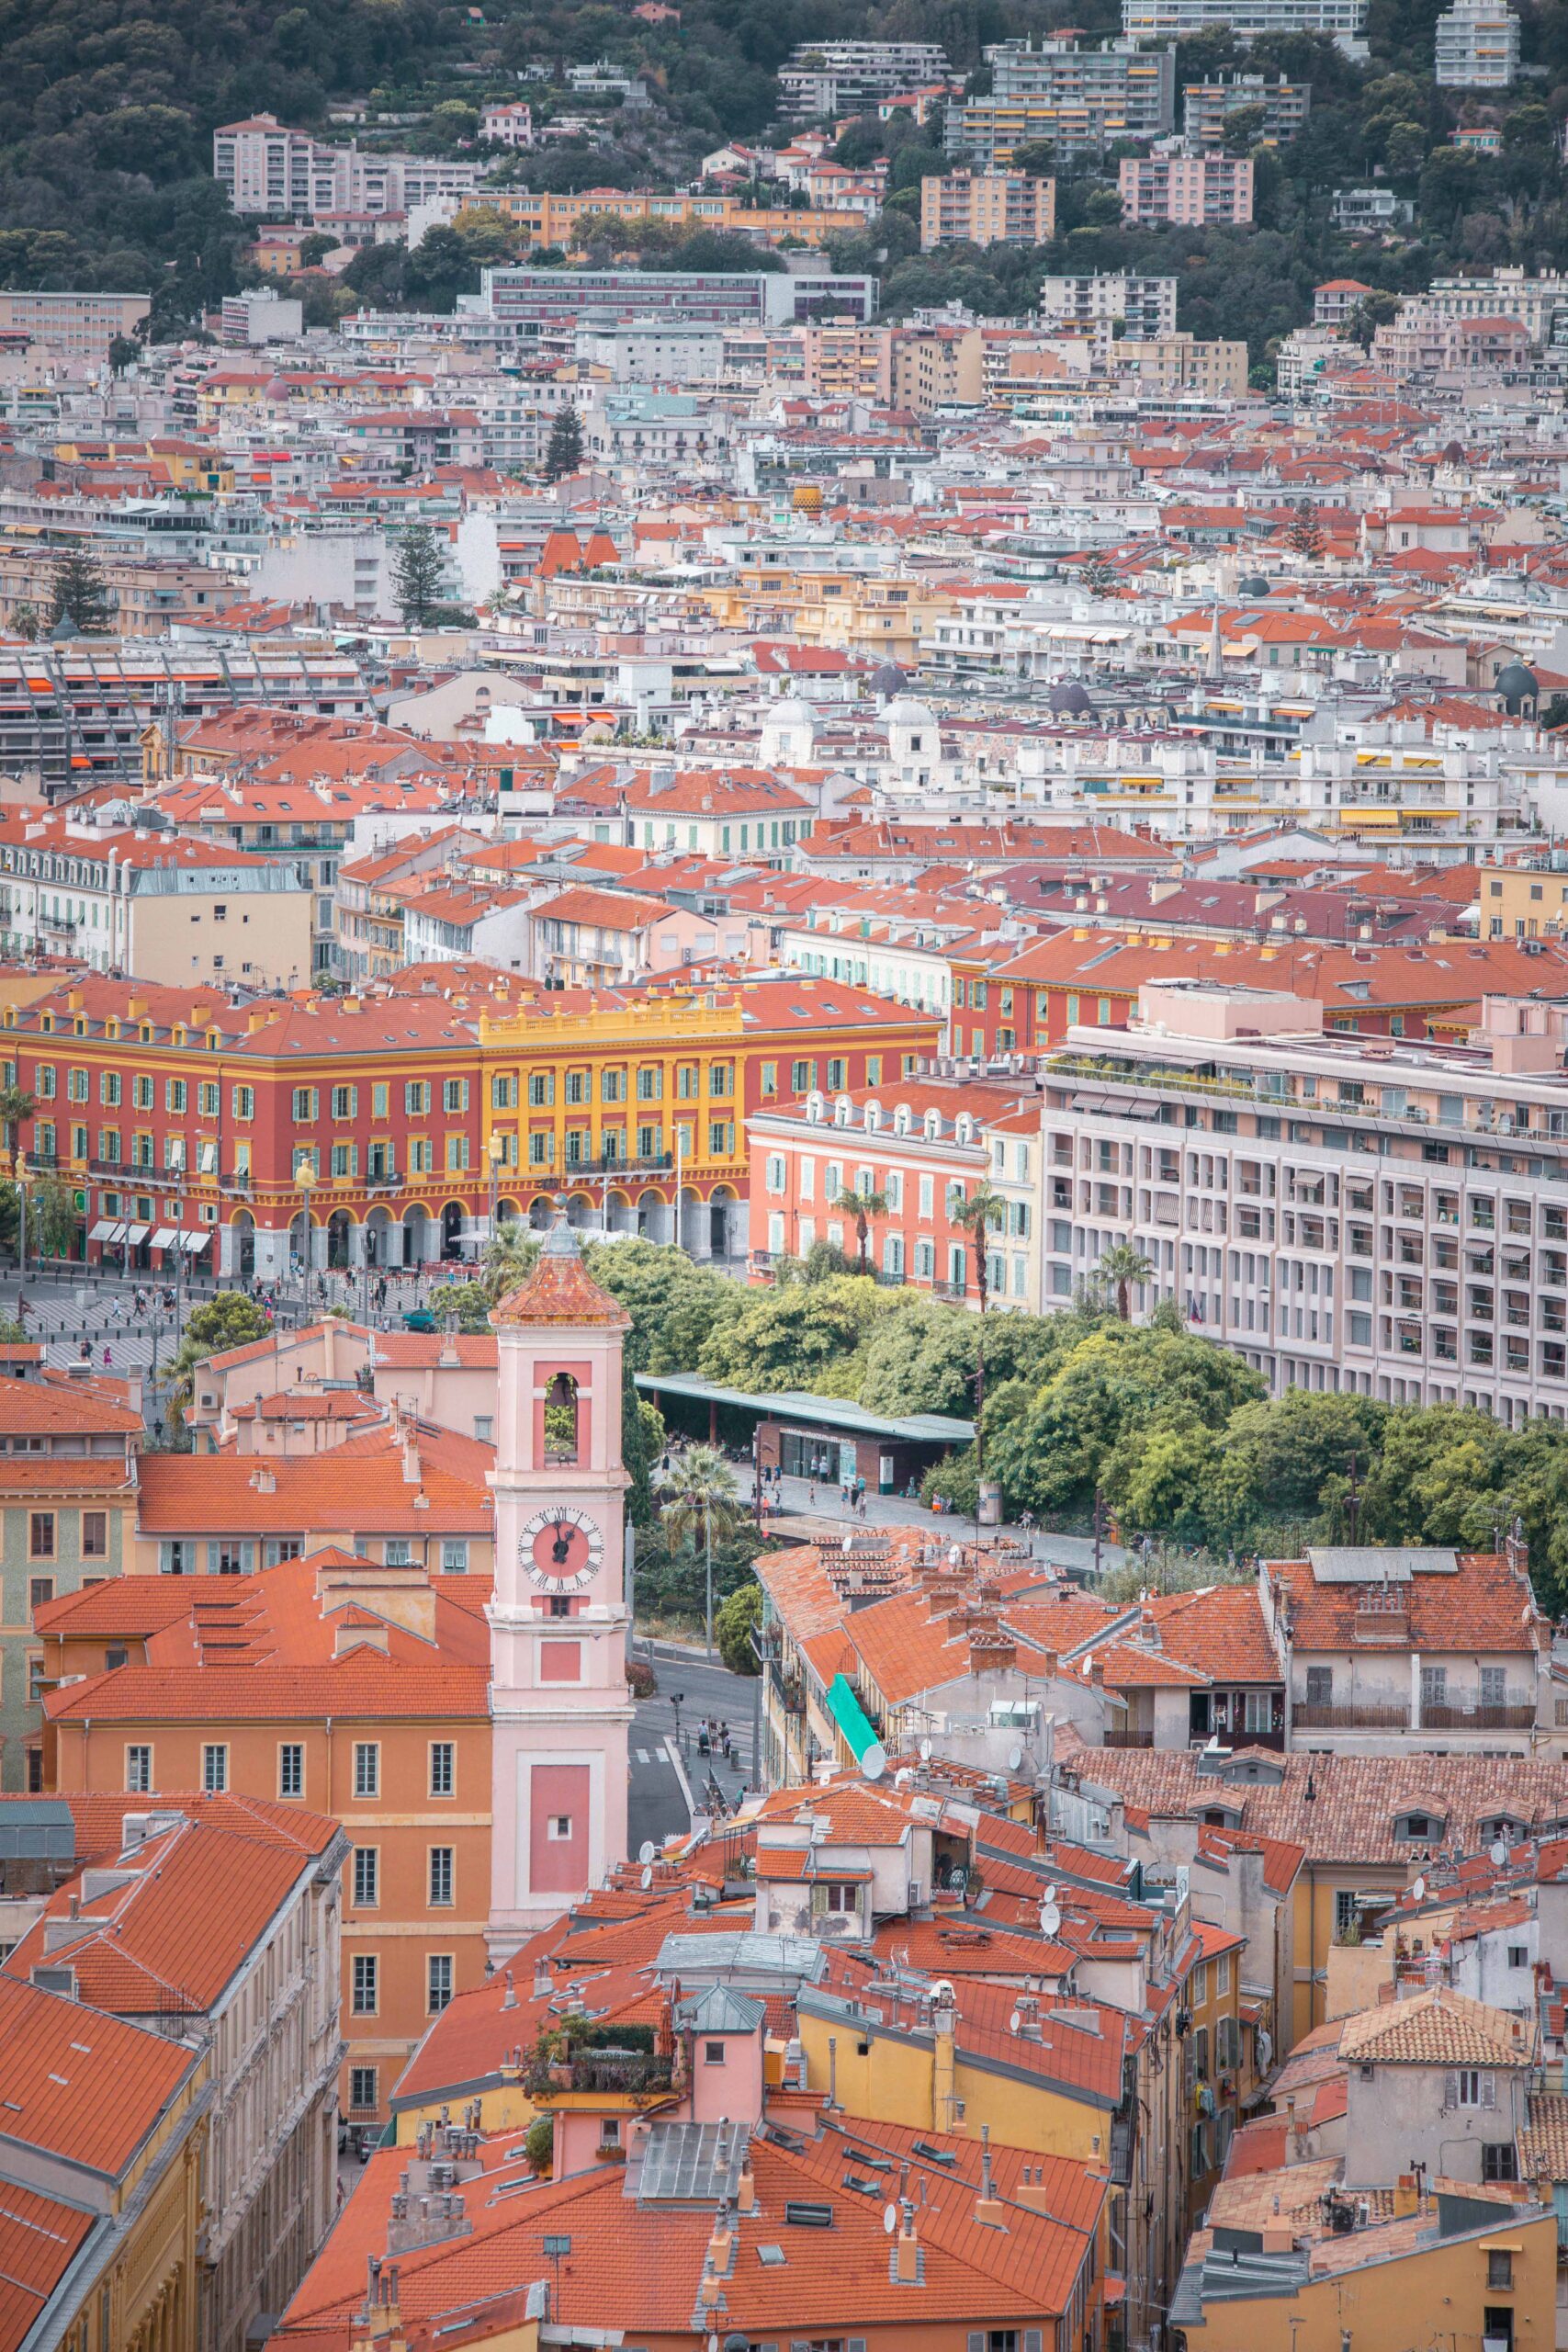 Panoramic view of the rooftops and Place Masséna as seen from the Colline du Château (Castle Hill) park in Nice, France